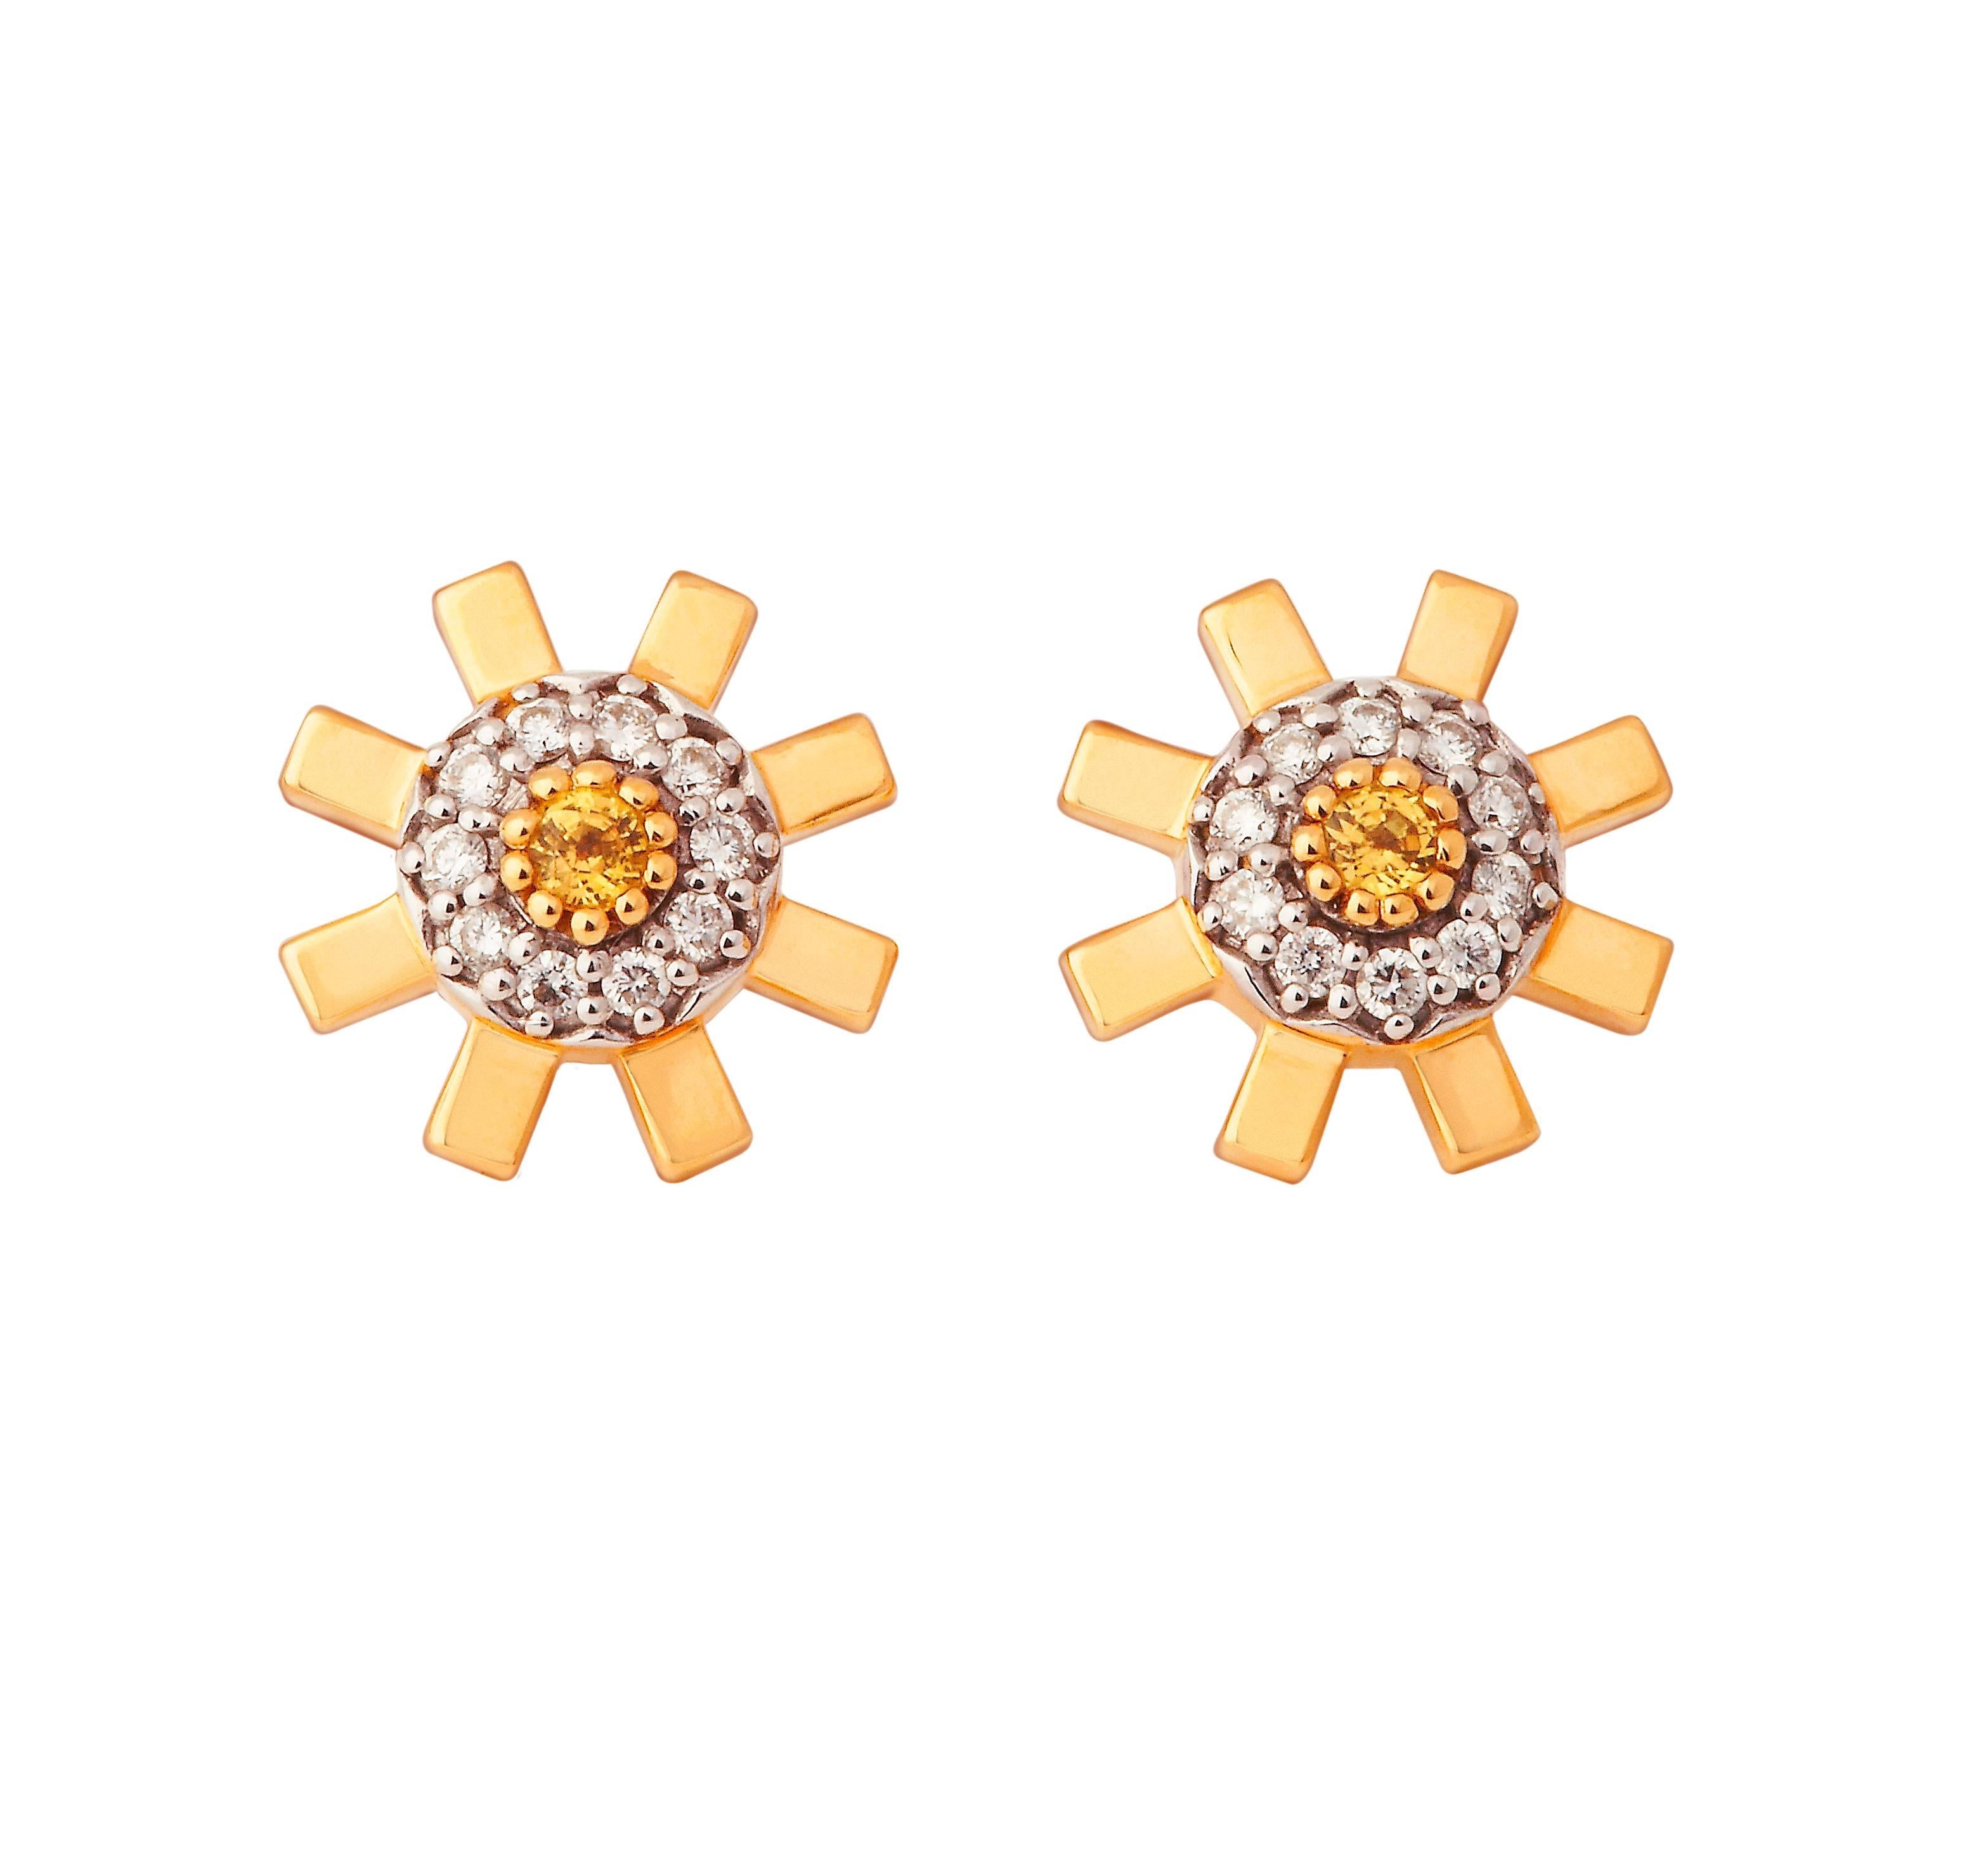 The Stenmark Sun Ray stud earrings in 18 karat yellow gold, with 20 x 1.7 mm G colour, VS1 diamonds and two 3 mm yellow sapphires are the perfect gold stud, but with more: more polish, more glamour and more sparkle. The lustrous, highly-polished